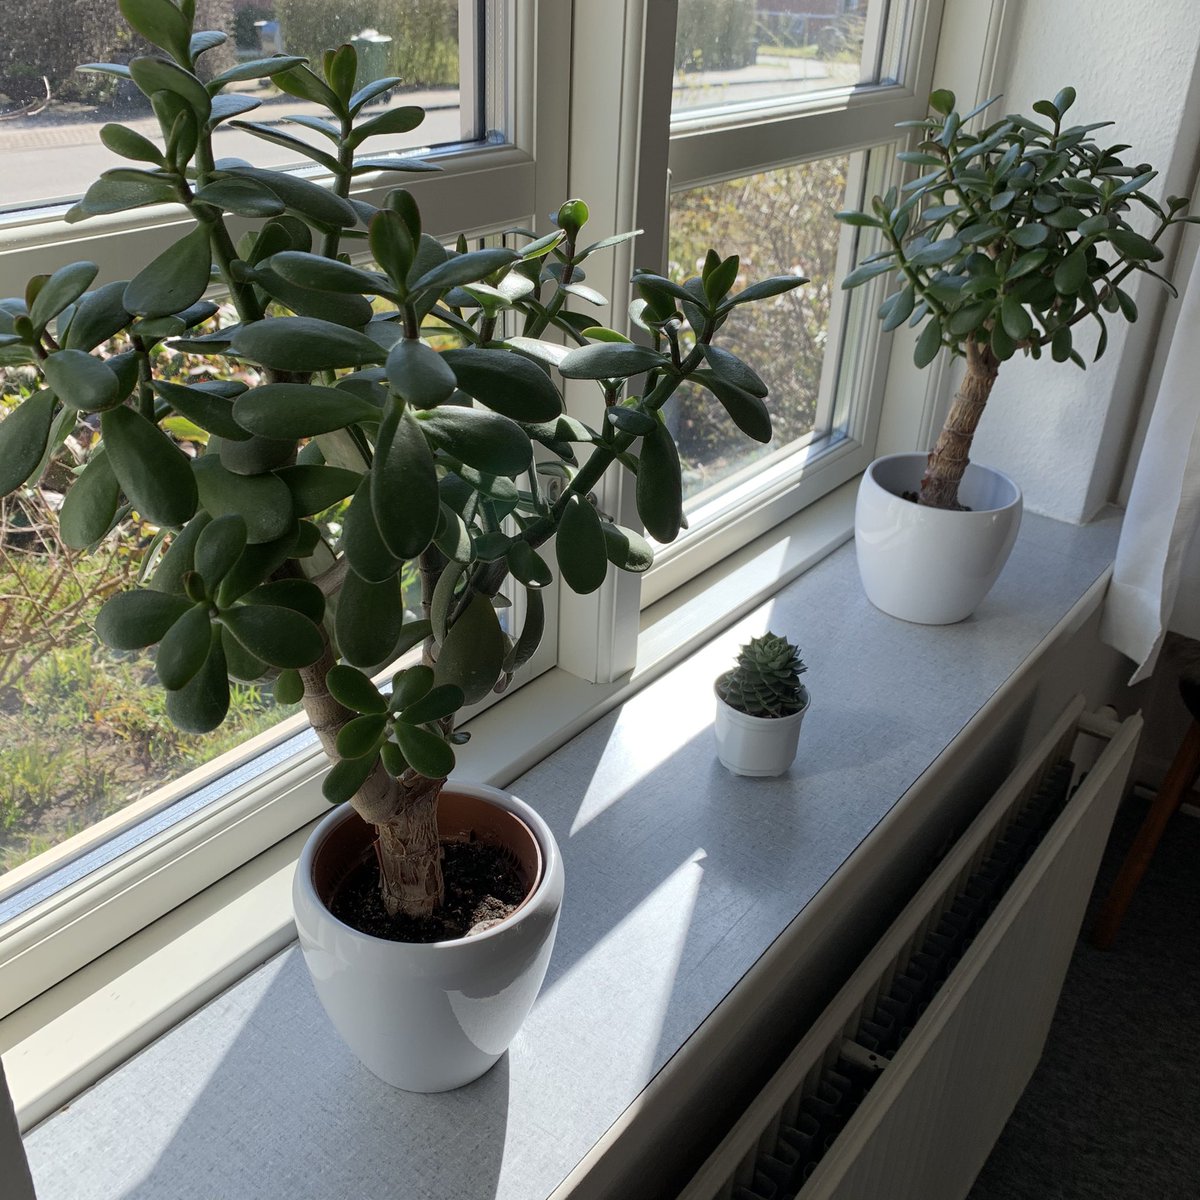 More money plants??? Look... they’re hard to kill. Both physically and emotionally. I have never met a money plant I didn’t want to save.